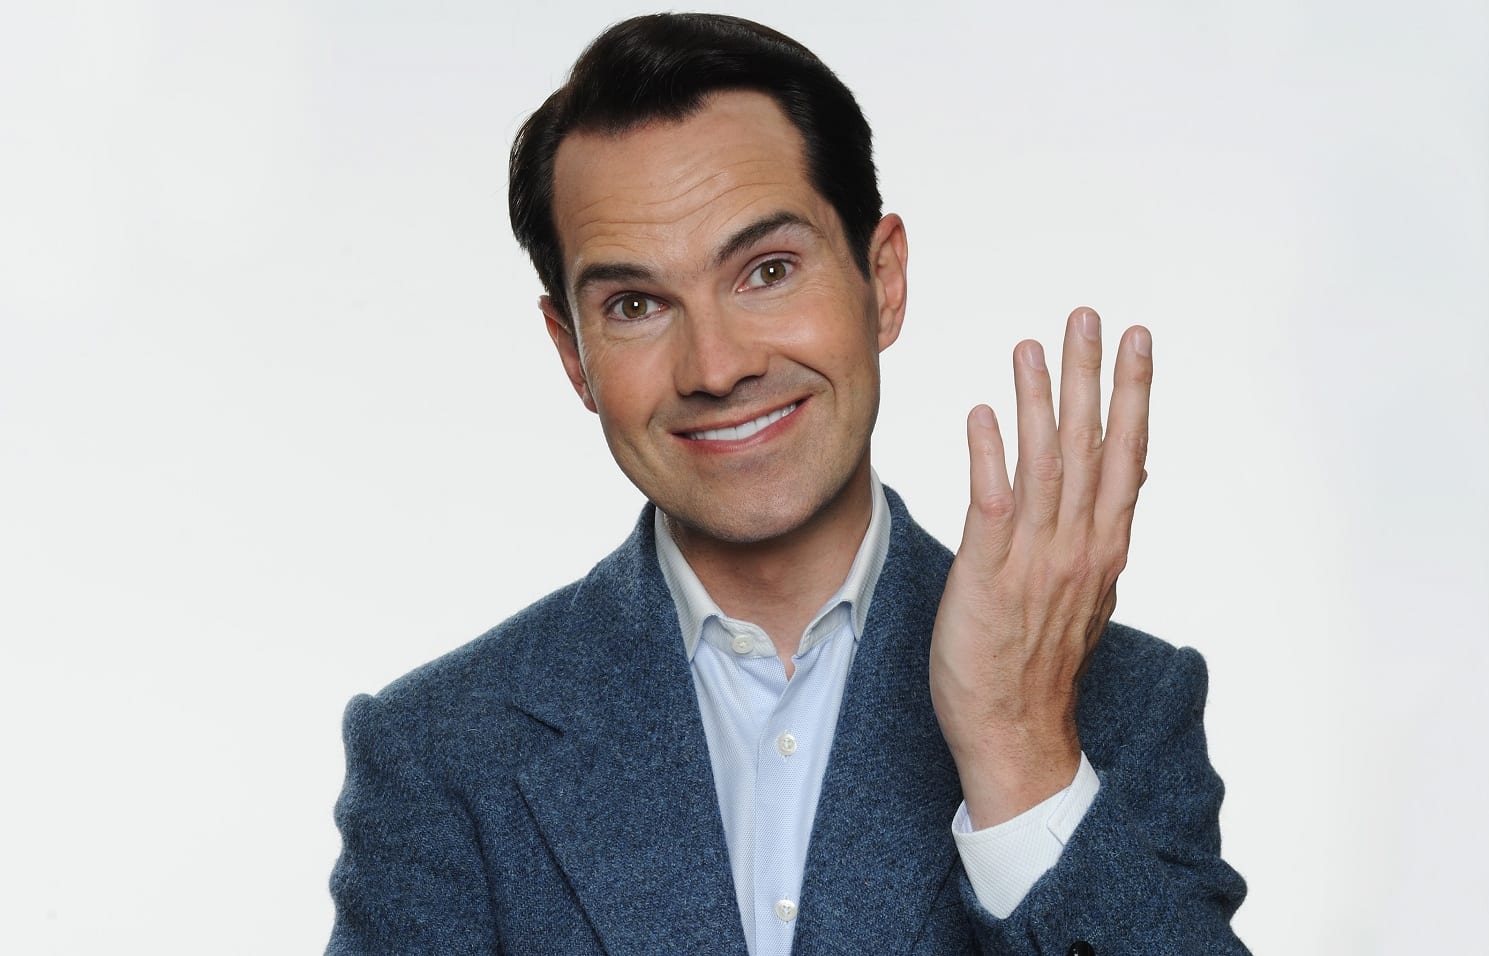 British comedian Jimmy Carr is in New Zealand for shows in January 2018.